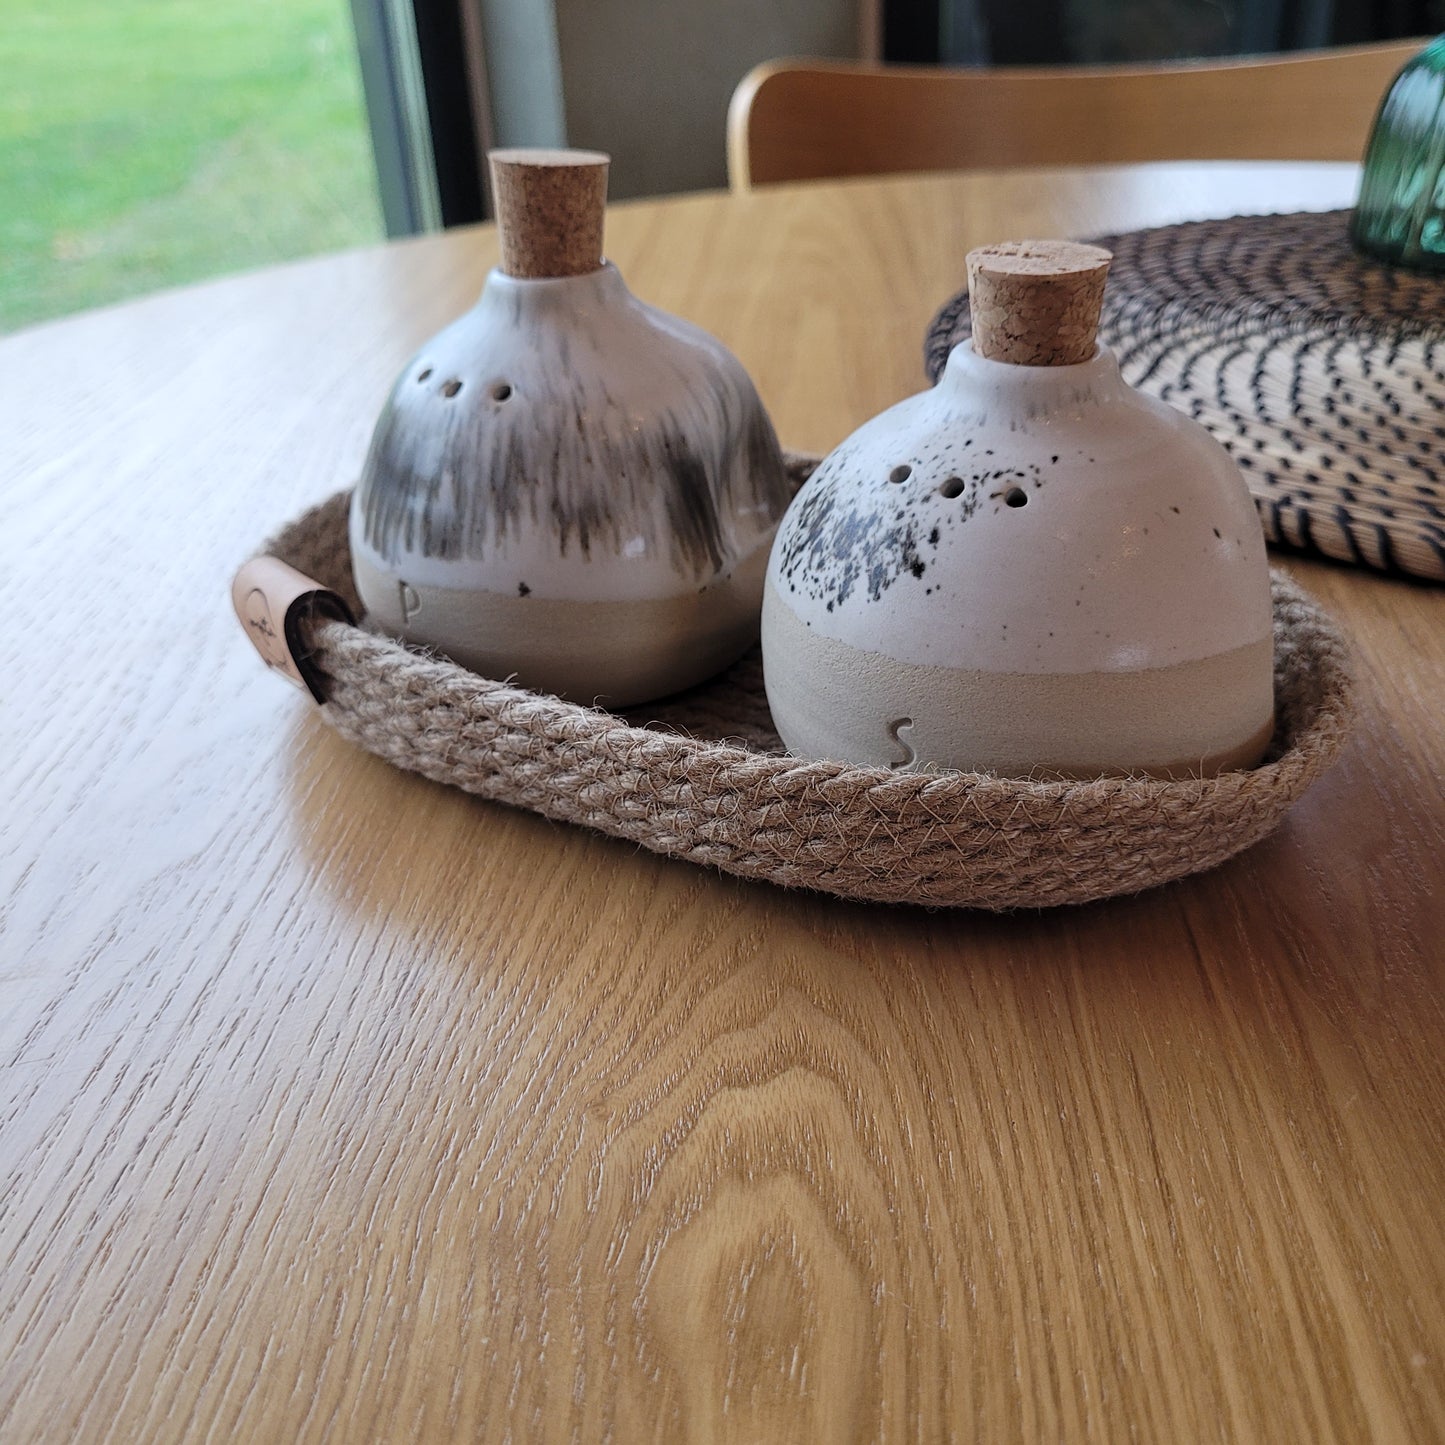 Elegant set of hand-painted salt and pepper shakers in a rustic farmhouse style.